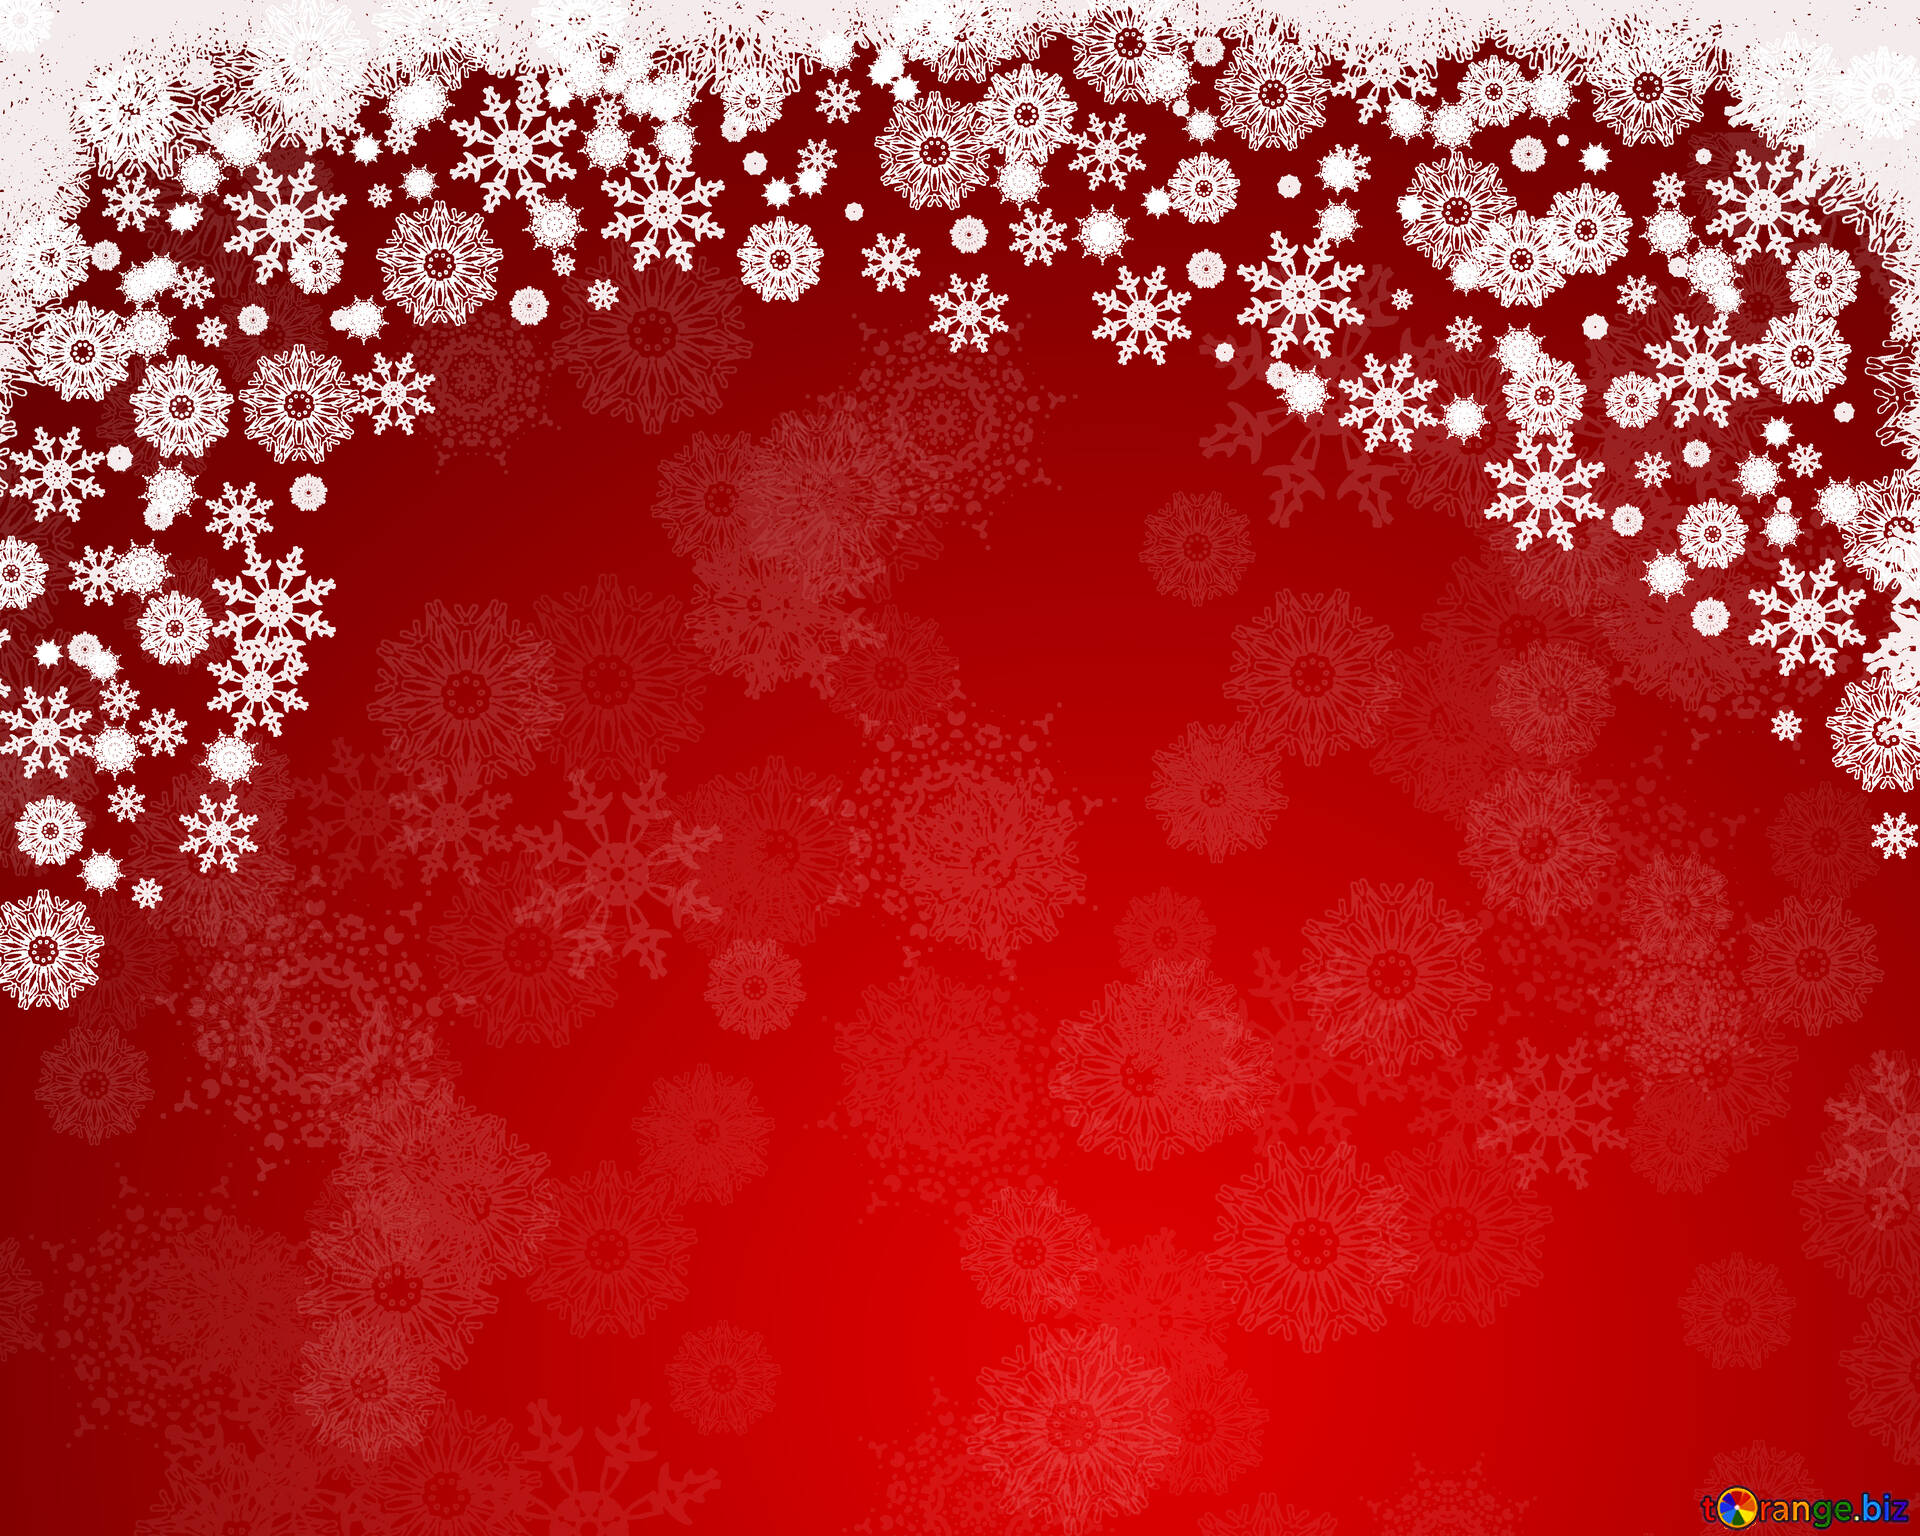 Christmas cards image red background for the christmas and new year cards  images clipart № 40655  ~ free pics on cc-by license